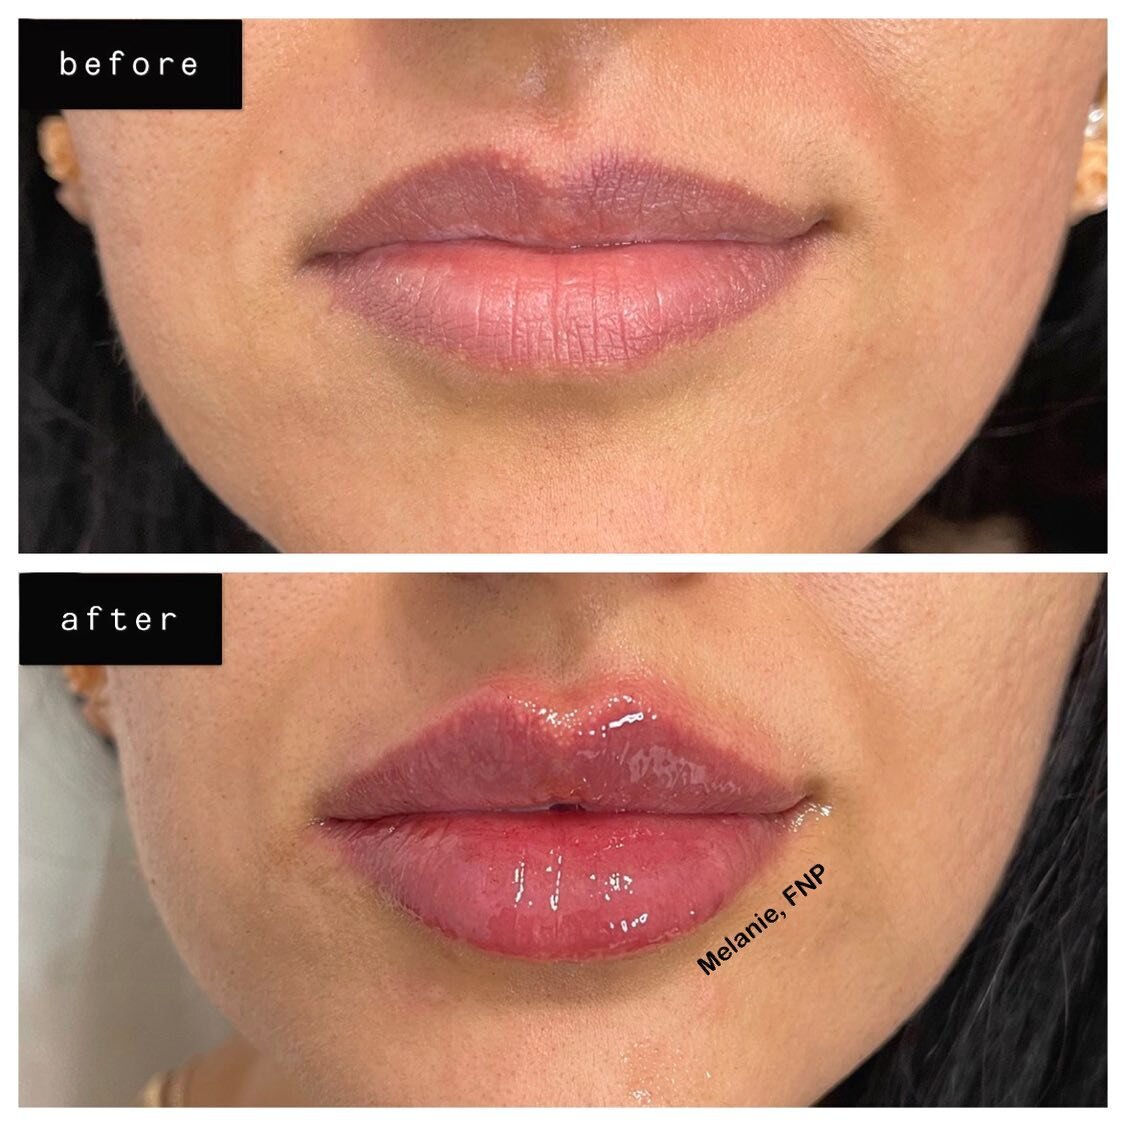 1 full syringe Juvéderm Ultra Plus XC💉
✅RUSSIAN LIPS
✅BORDER REFINEMENT
✅ASYMMETRY CORRECTION
✅KEYHOLE POUT

What do you guys think of these results?😻⬇️

#russianlips#Juvederm#Restylane#Voluma#Botox#Dysport#Kybella#aesthetics#dermalfiller#lipaugme